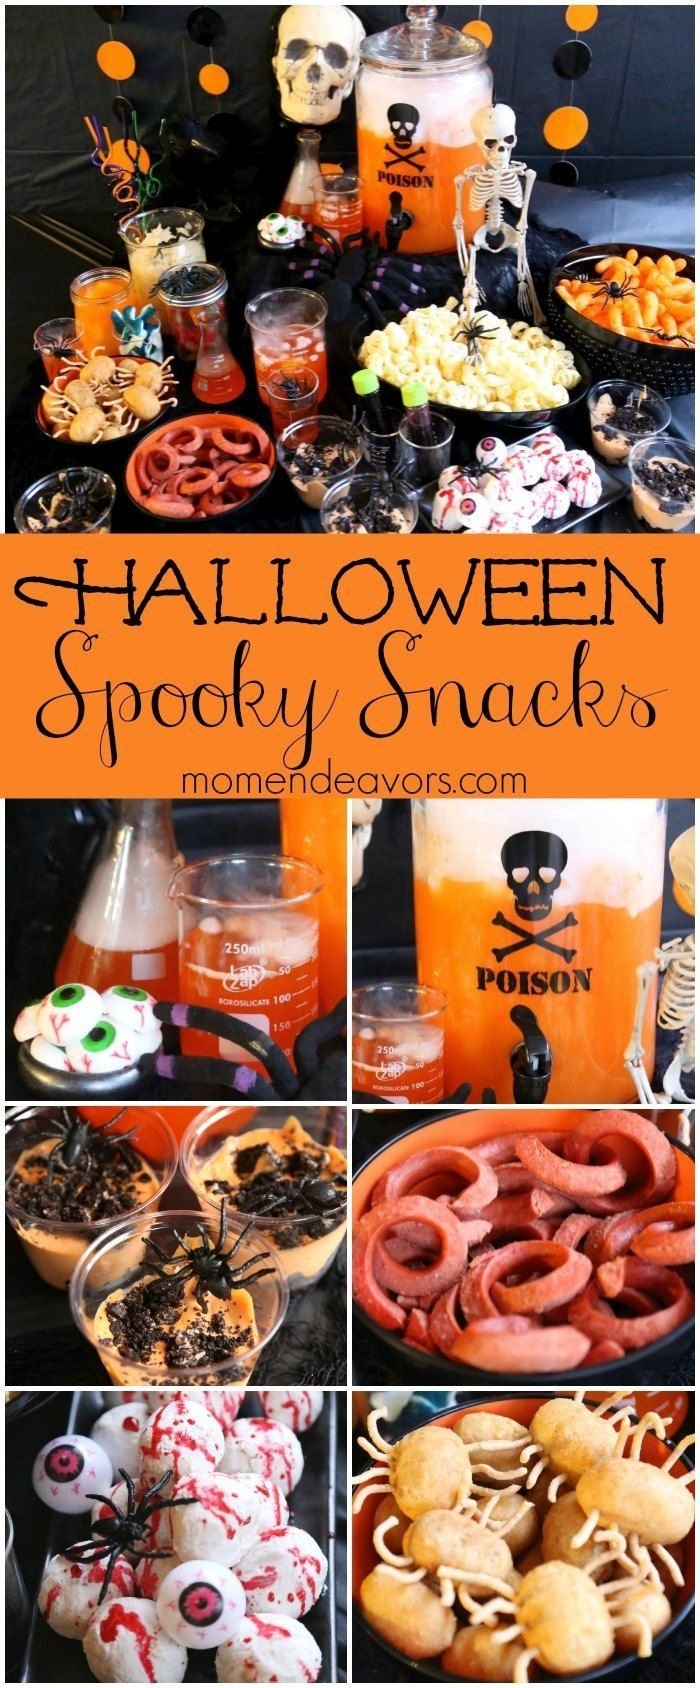 10 Nice Ideas For A Halloween Party 629 best halloween party ideas images on pinterest halloween prop 7 2023